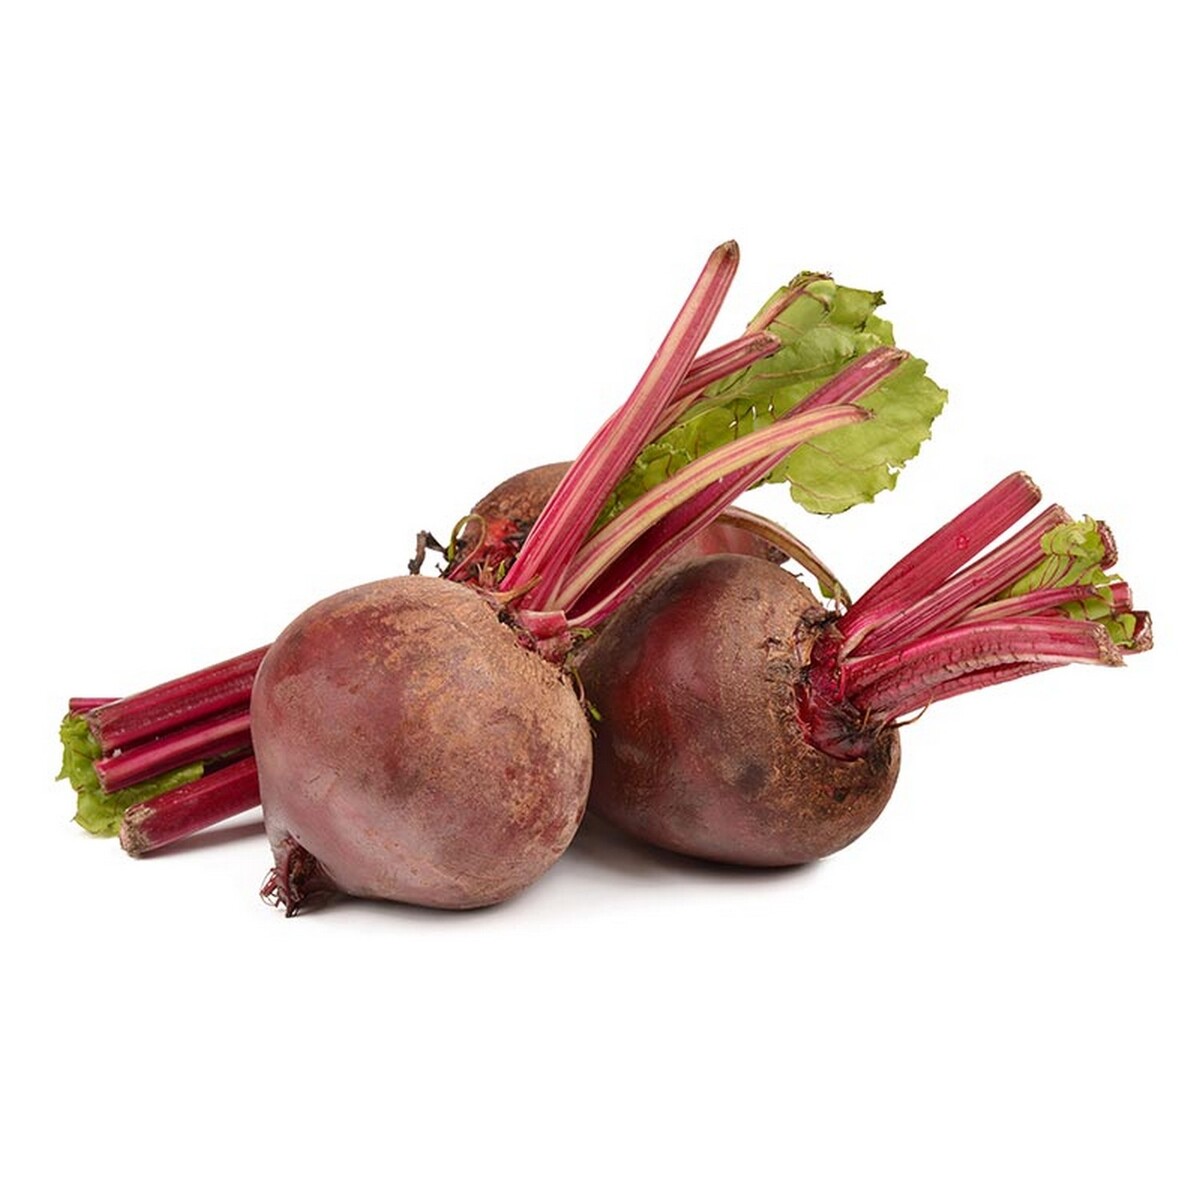 Beetroot  approx. 450gm-500gm